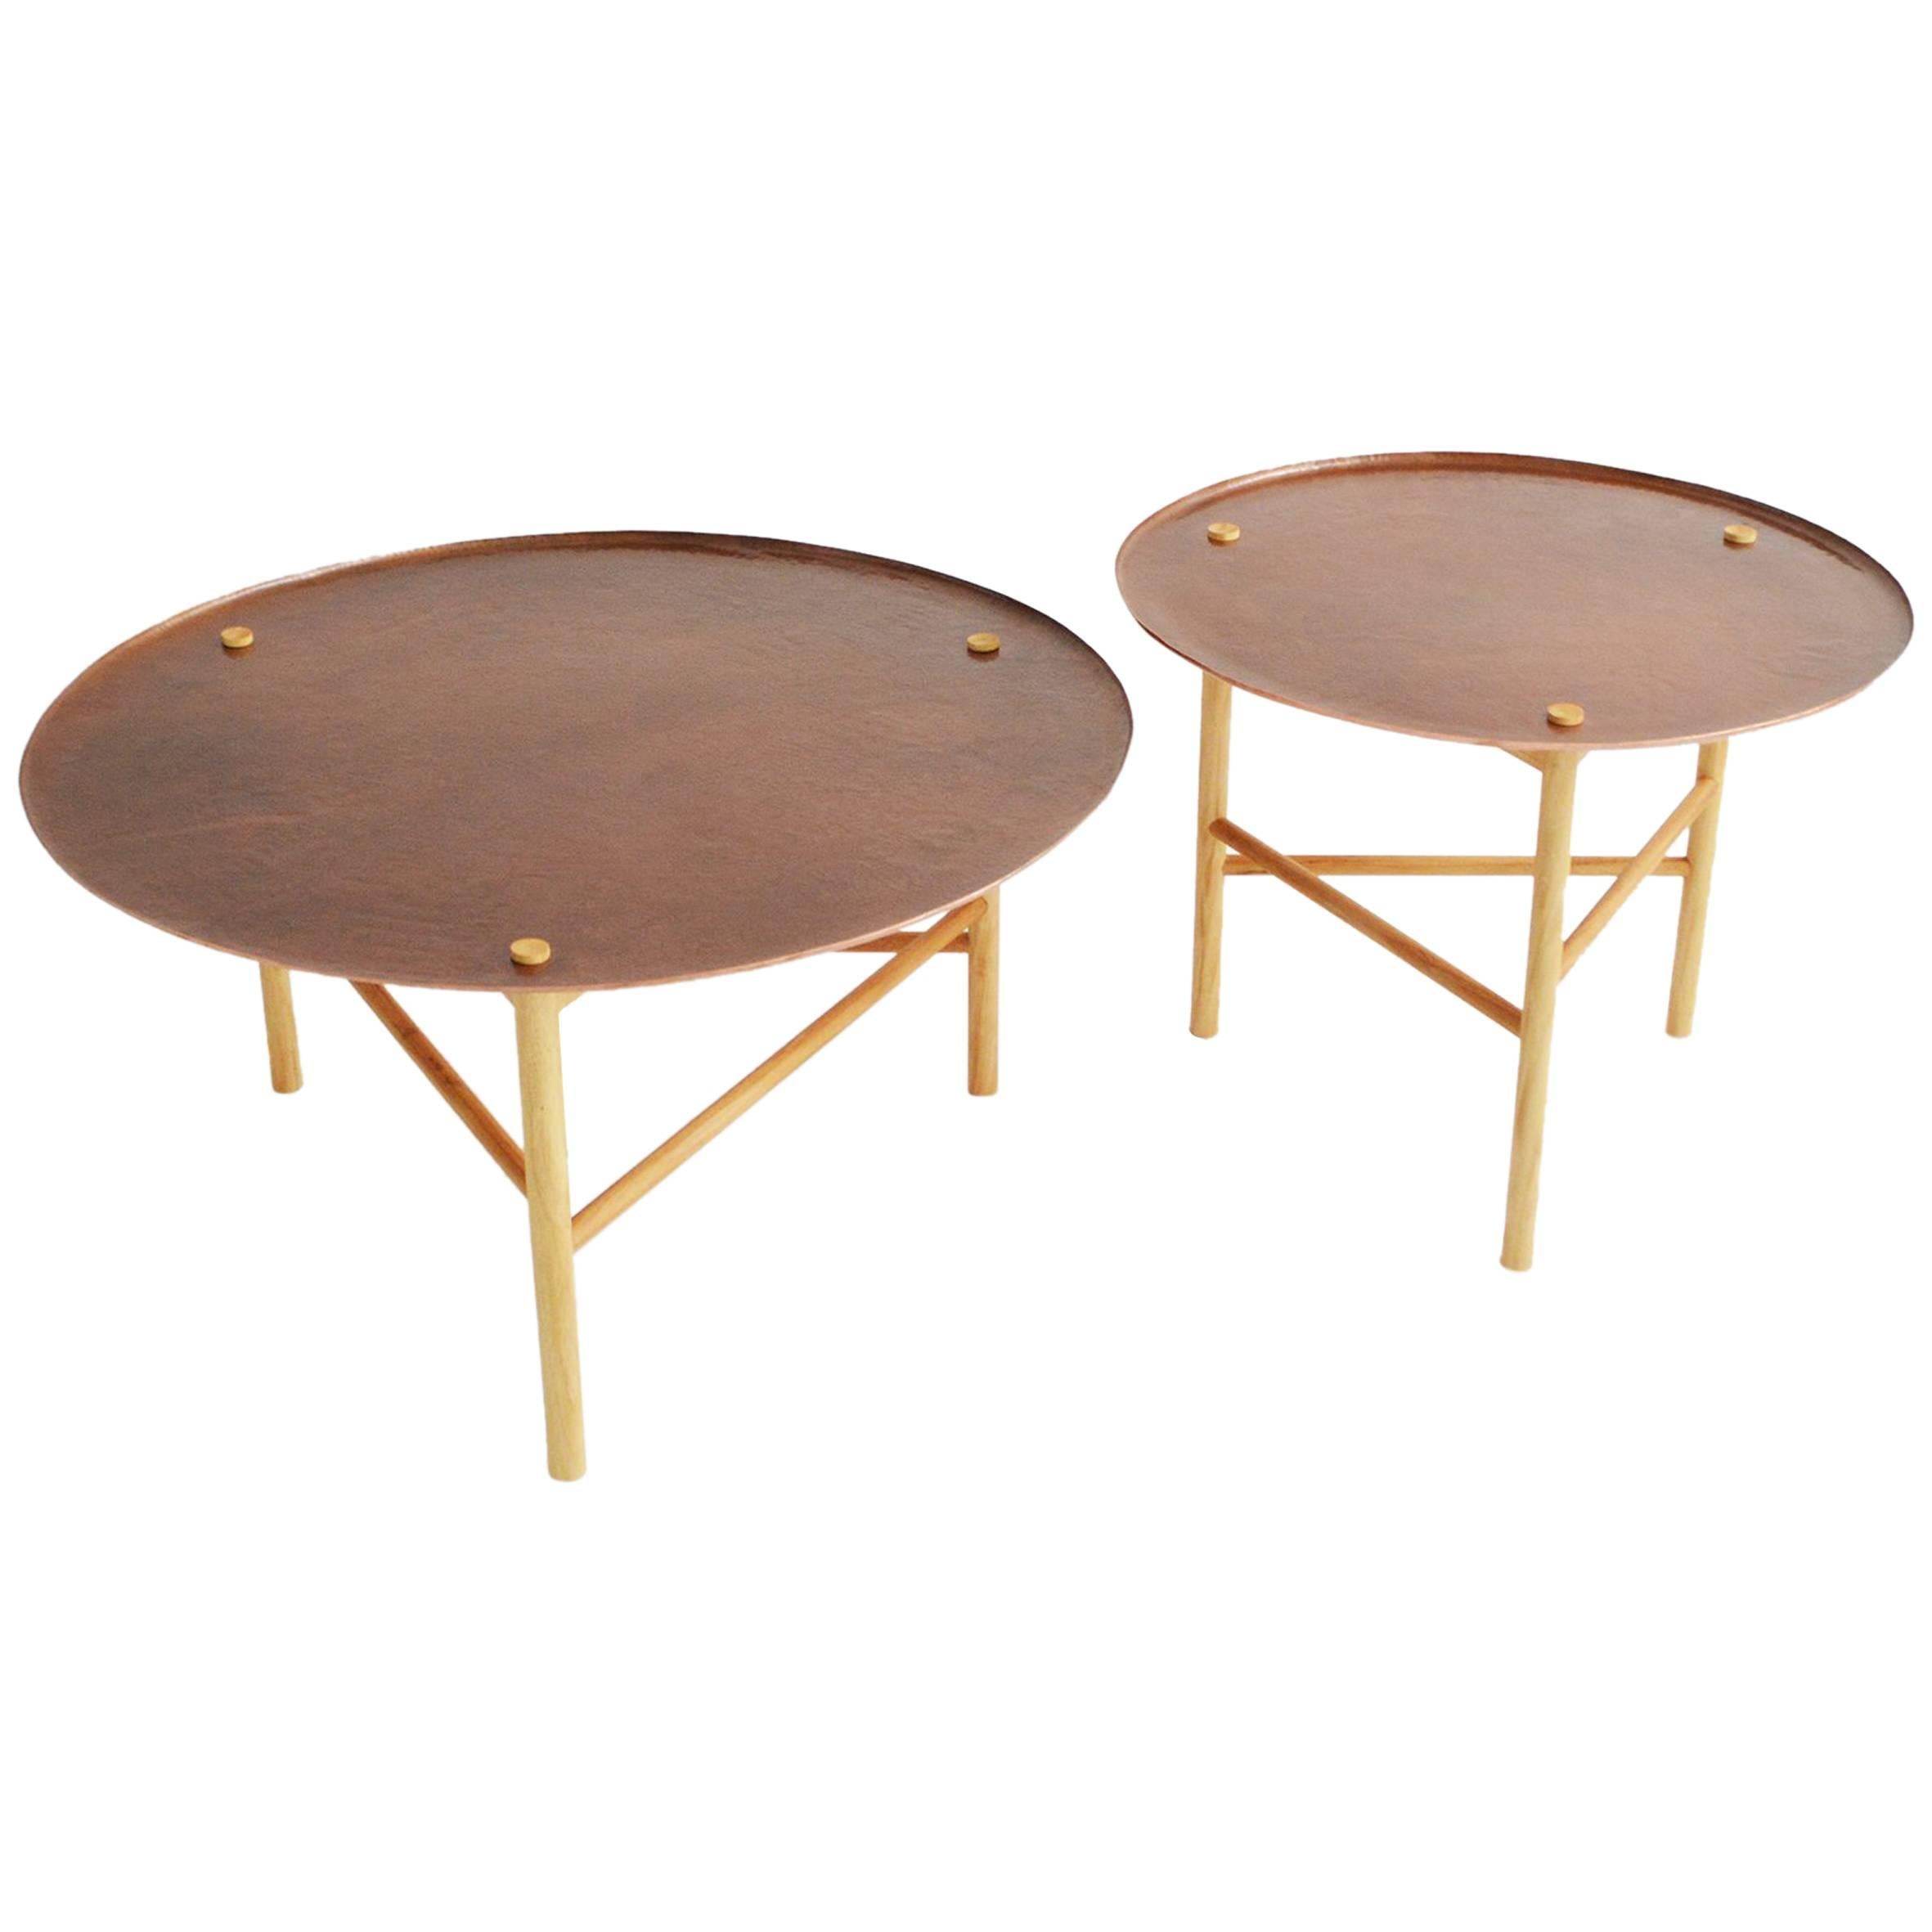 "Venus" Mexican Contemporary Side Tables Handmade in Copper im Angebot